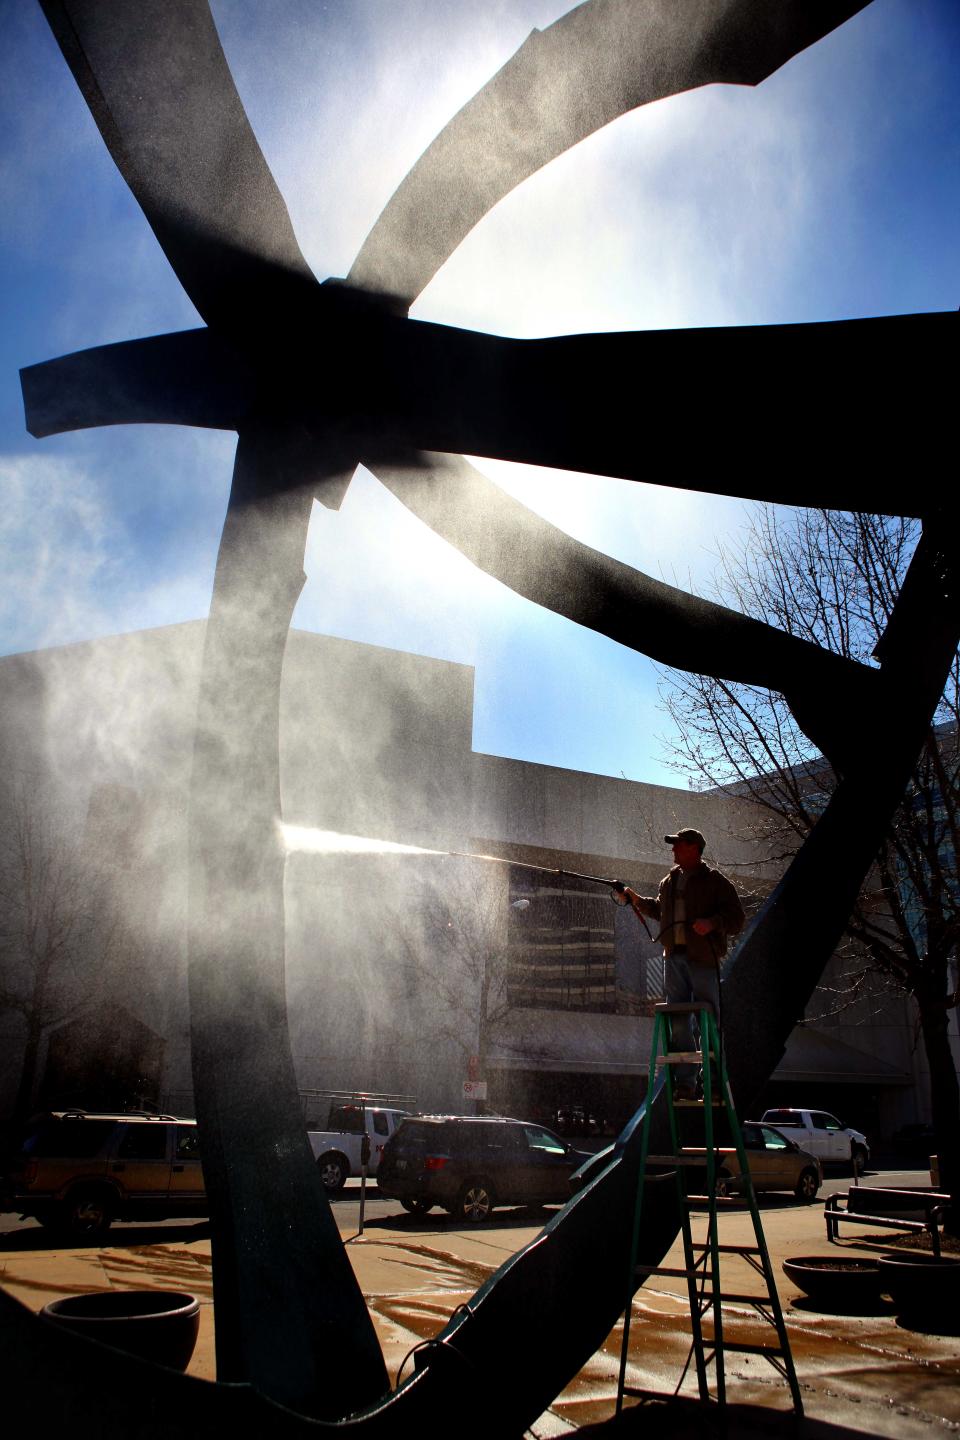 Gary Howe of Indianola creates a heavy mist while trying to spray wash bird droppings on Tuesday, April 12, 2011 from Crusoe Umbrella at Nollen Plaza next to the Civic Center of Greater Des Moines. He said the power washer might not be enough and he would get a portable lift so he could wipe them off.